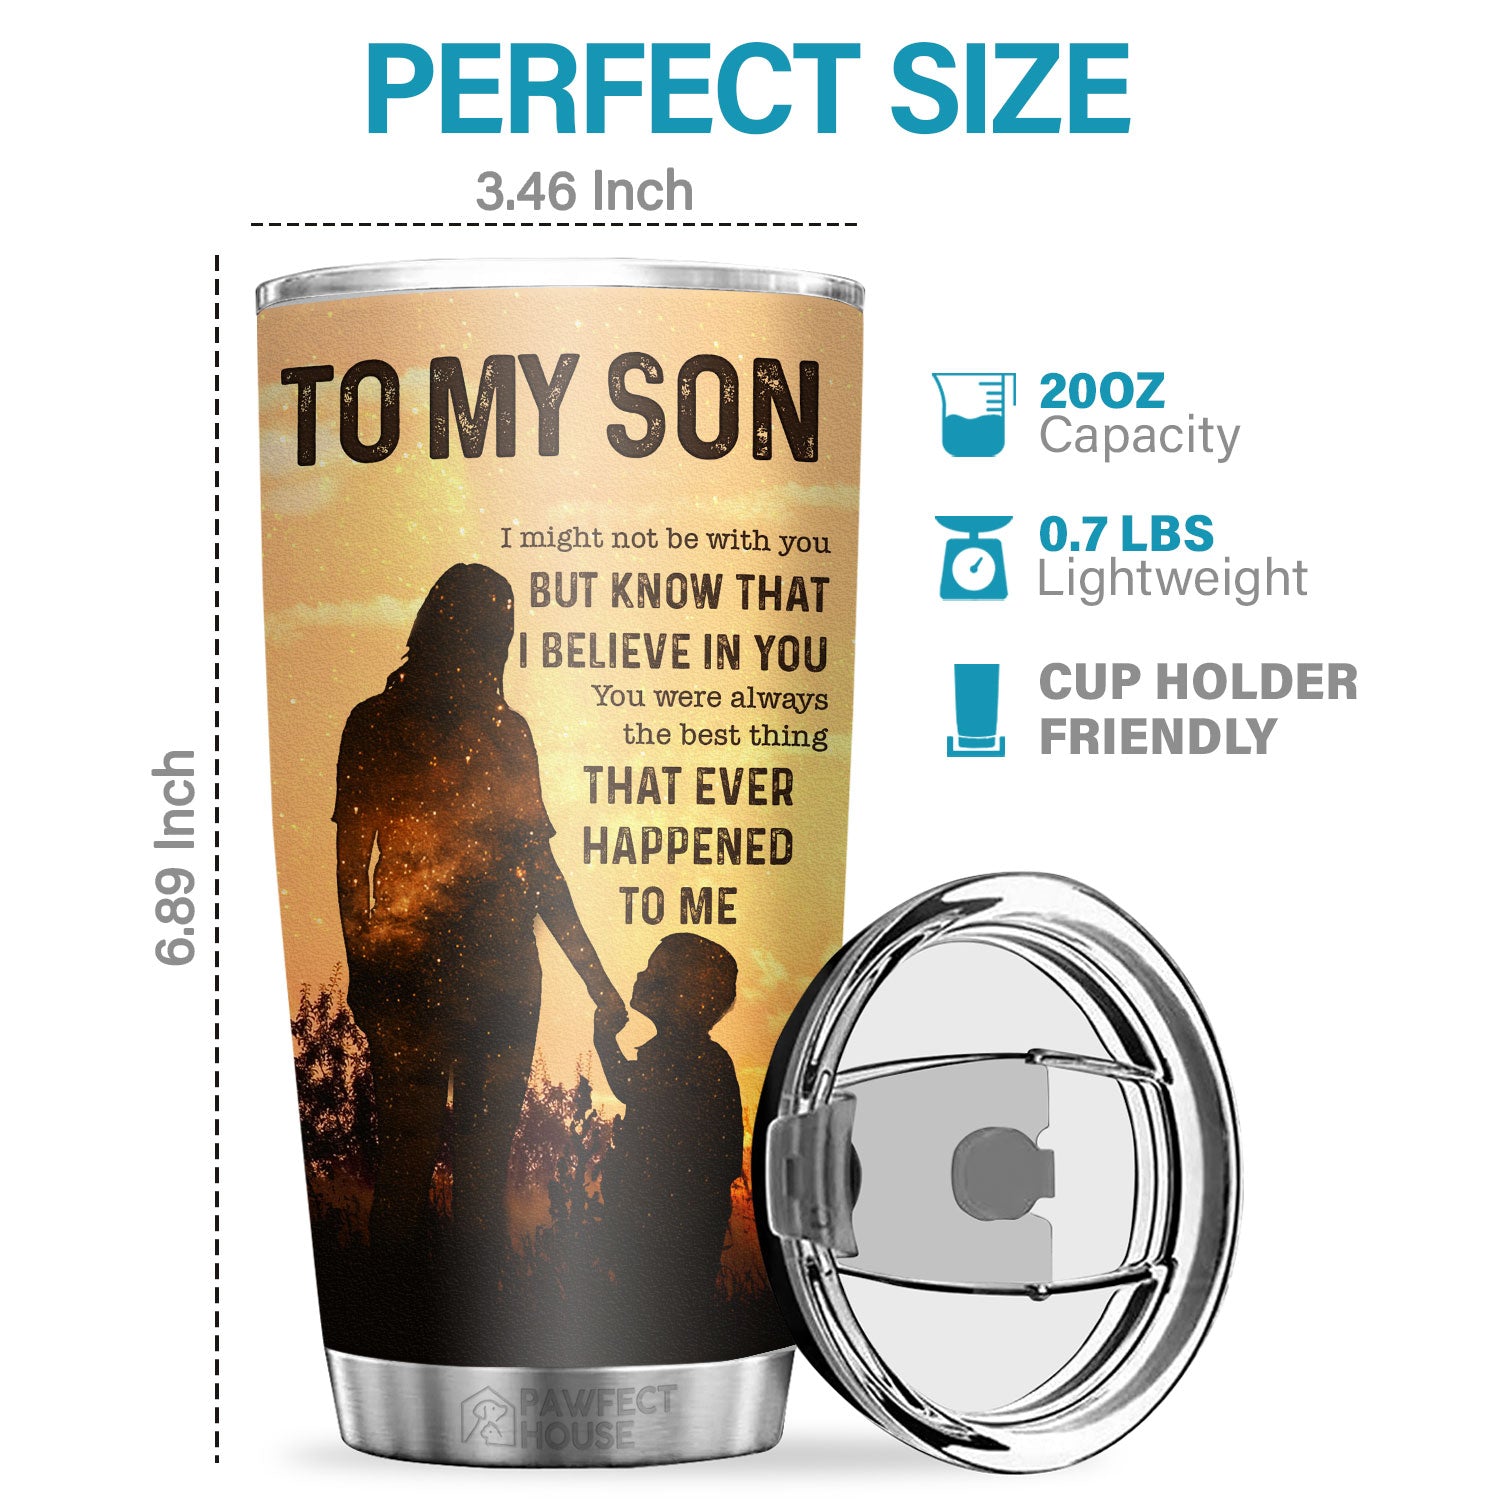 Pawfect House 20oz Tumbler - Thank You For Standing By My Side - Stain -  Pawfect House ™